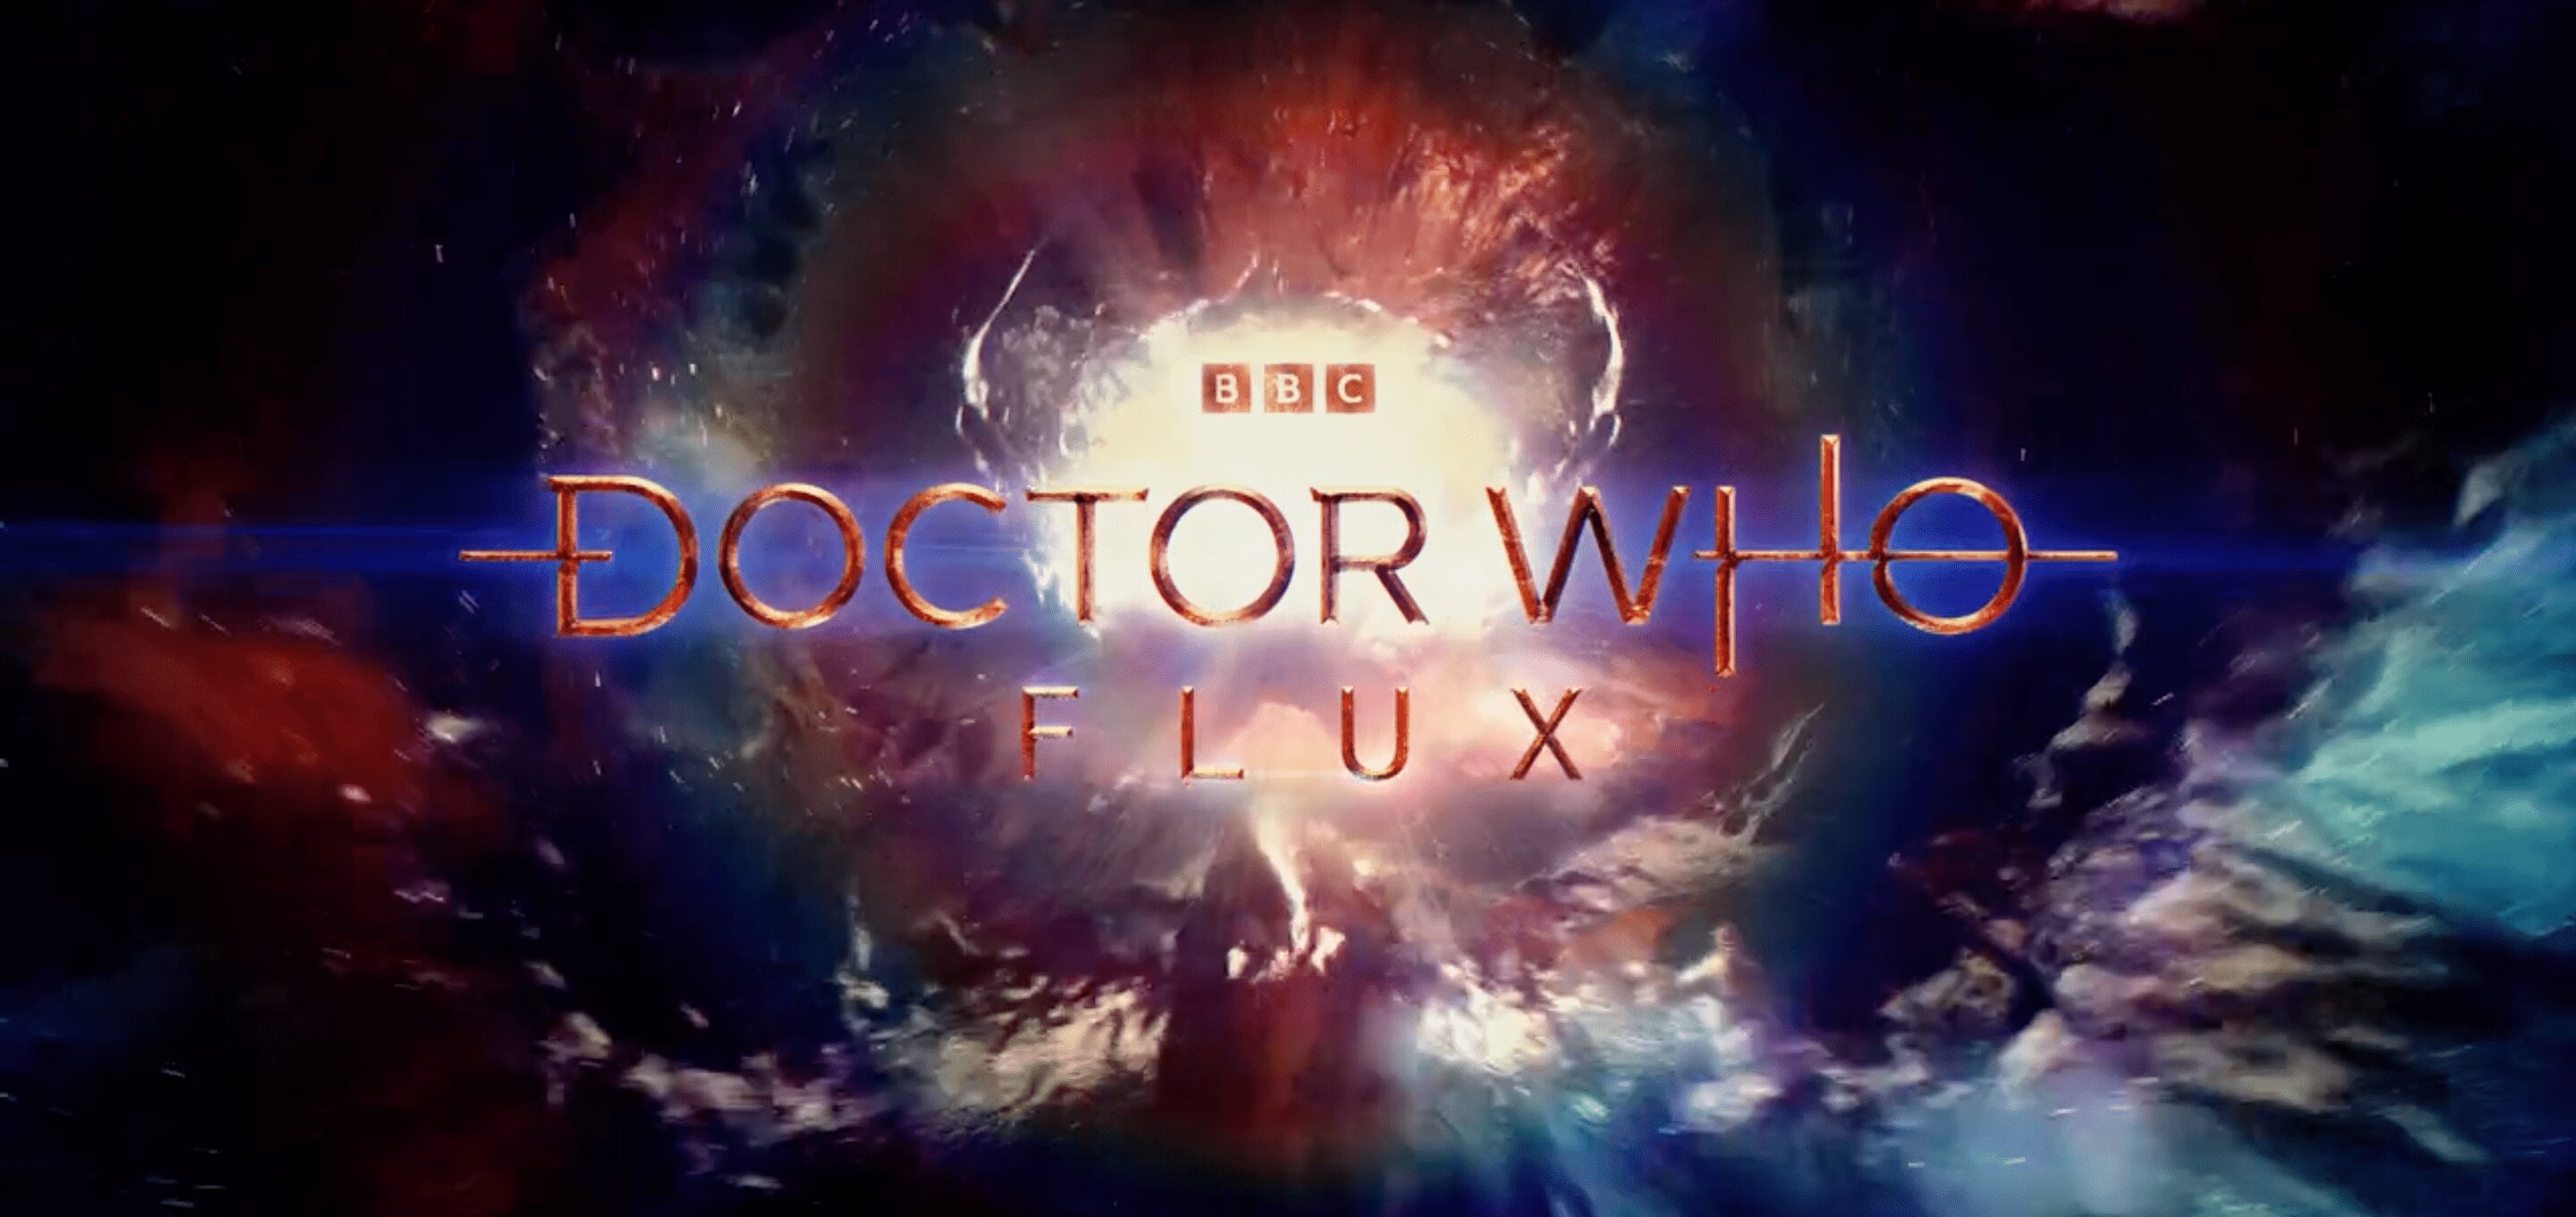 Doctor Who Season 13, Episode 5 - "Survivors of the Flux" Review.